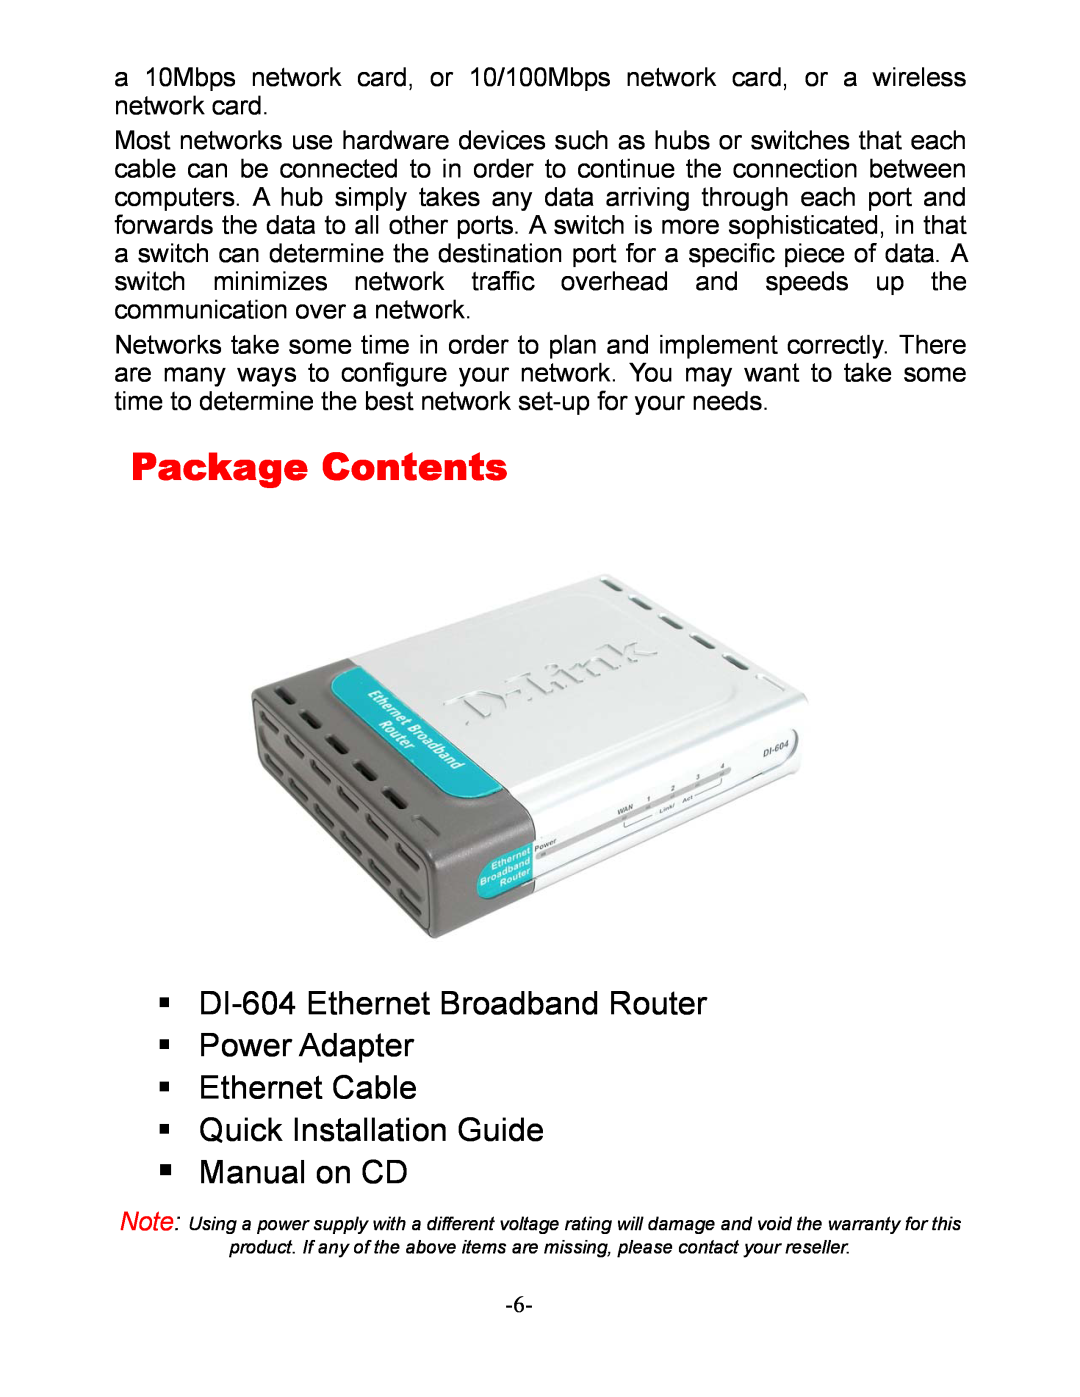 D-Link manual Package Contents, DI-604 Ethernet Broadband Router Power Adapter Ethernet Cable 